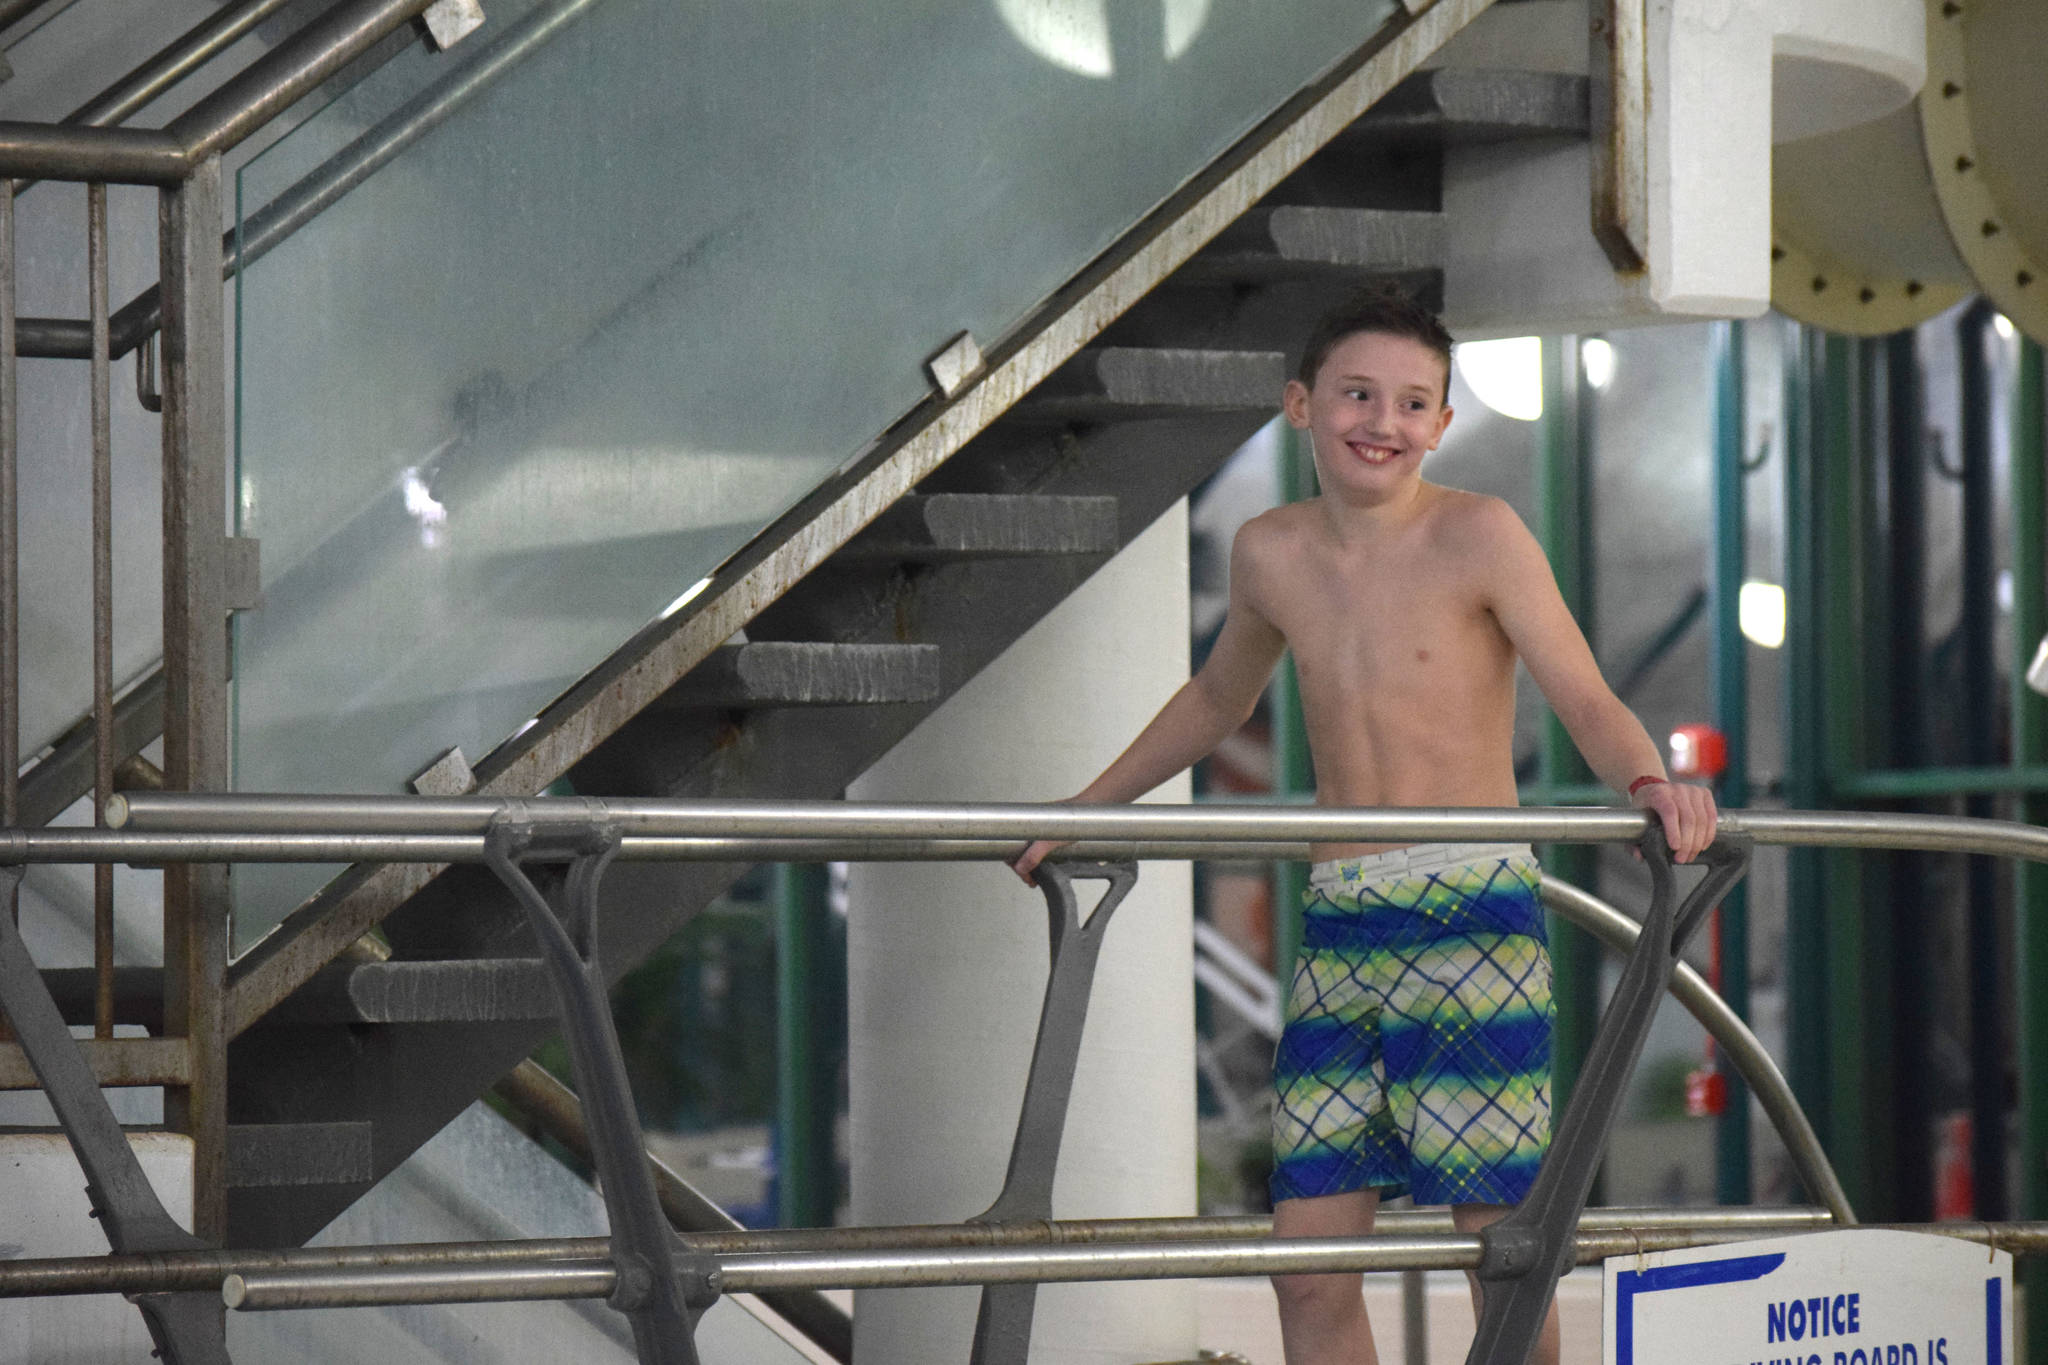 A contestant in the cannonball contest at the Nikiski Pool smiles for the judges on Thursday, Jan. 17, 2019. (Photo by Brian Mazurek/Peninsula Clarion)